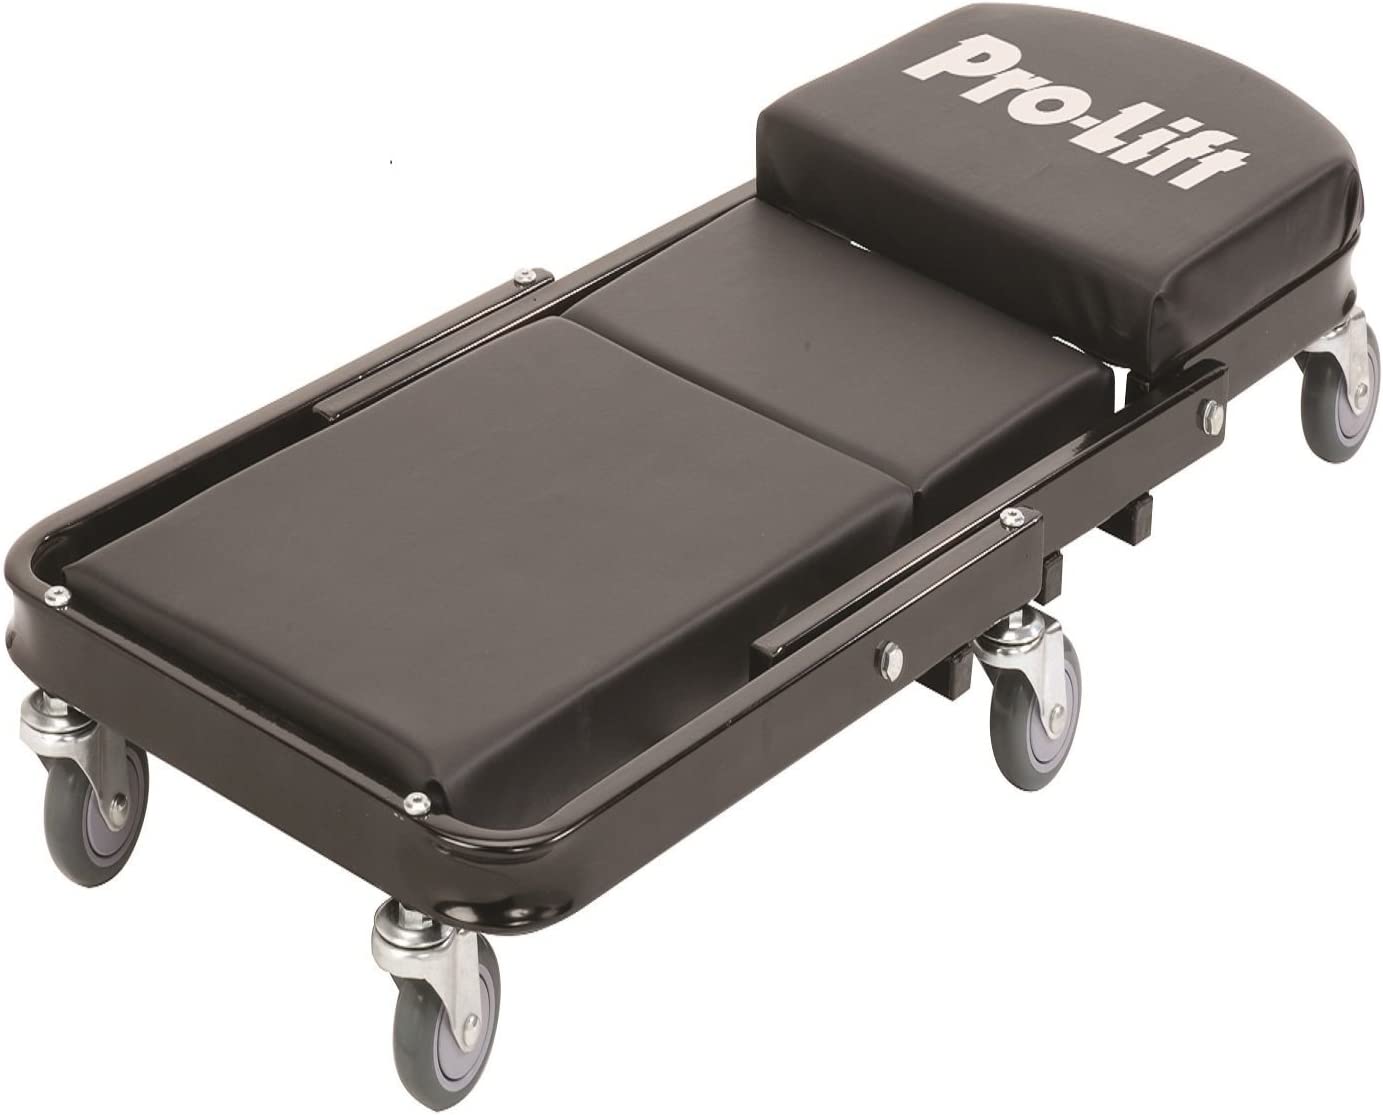 Pro-Lift C-5006 Foldable Mat Made from Heavy Duty Foam Great for Working in The Garage and Other